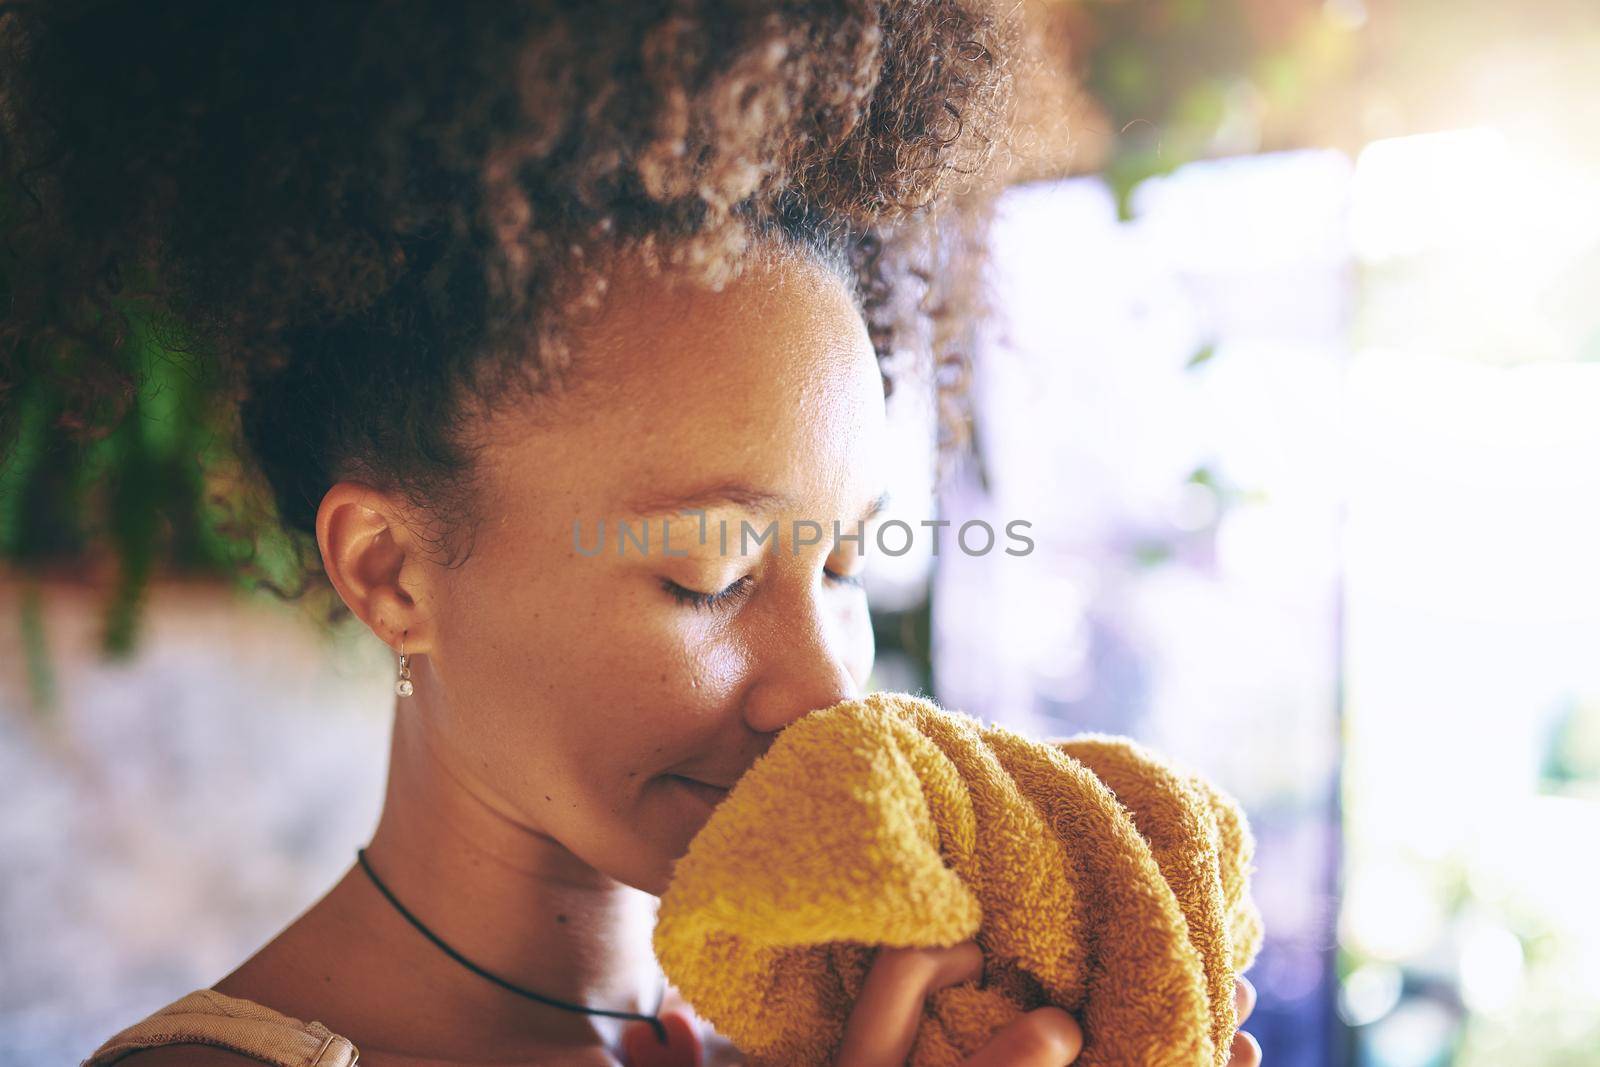 That fresh laundry smell is worth it stock photo by VizDelux